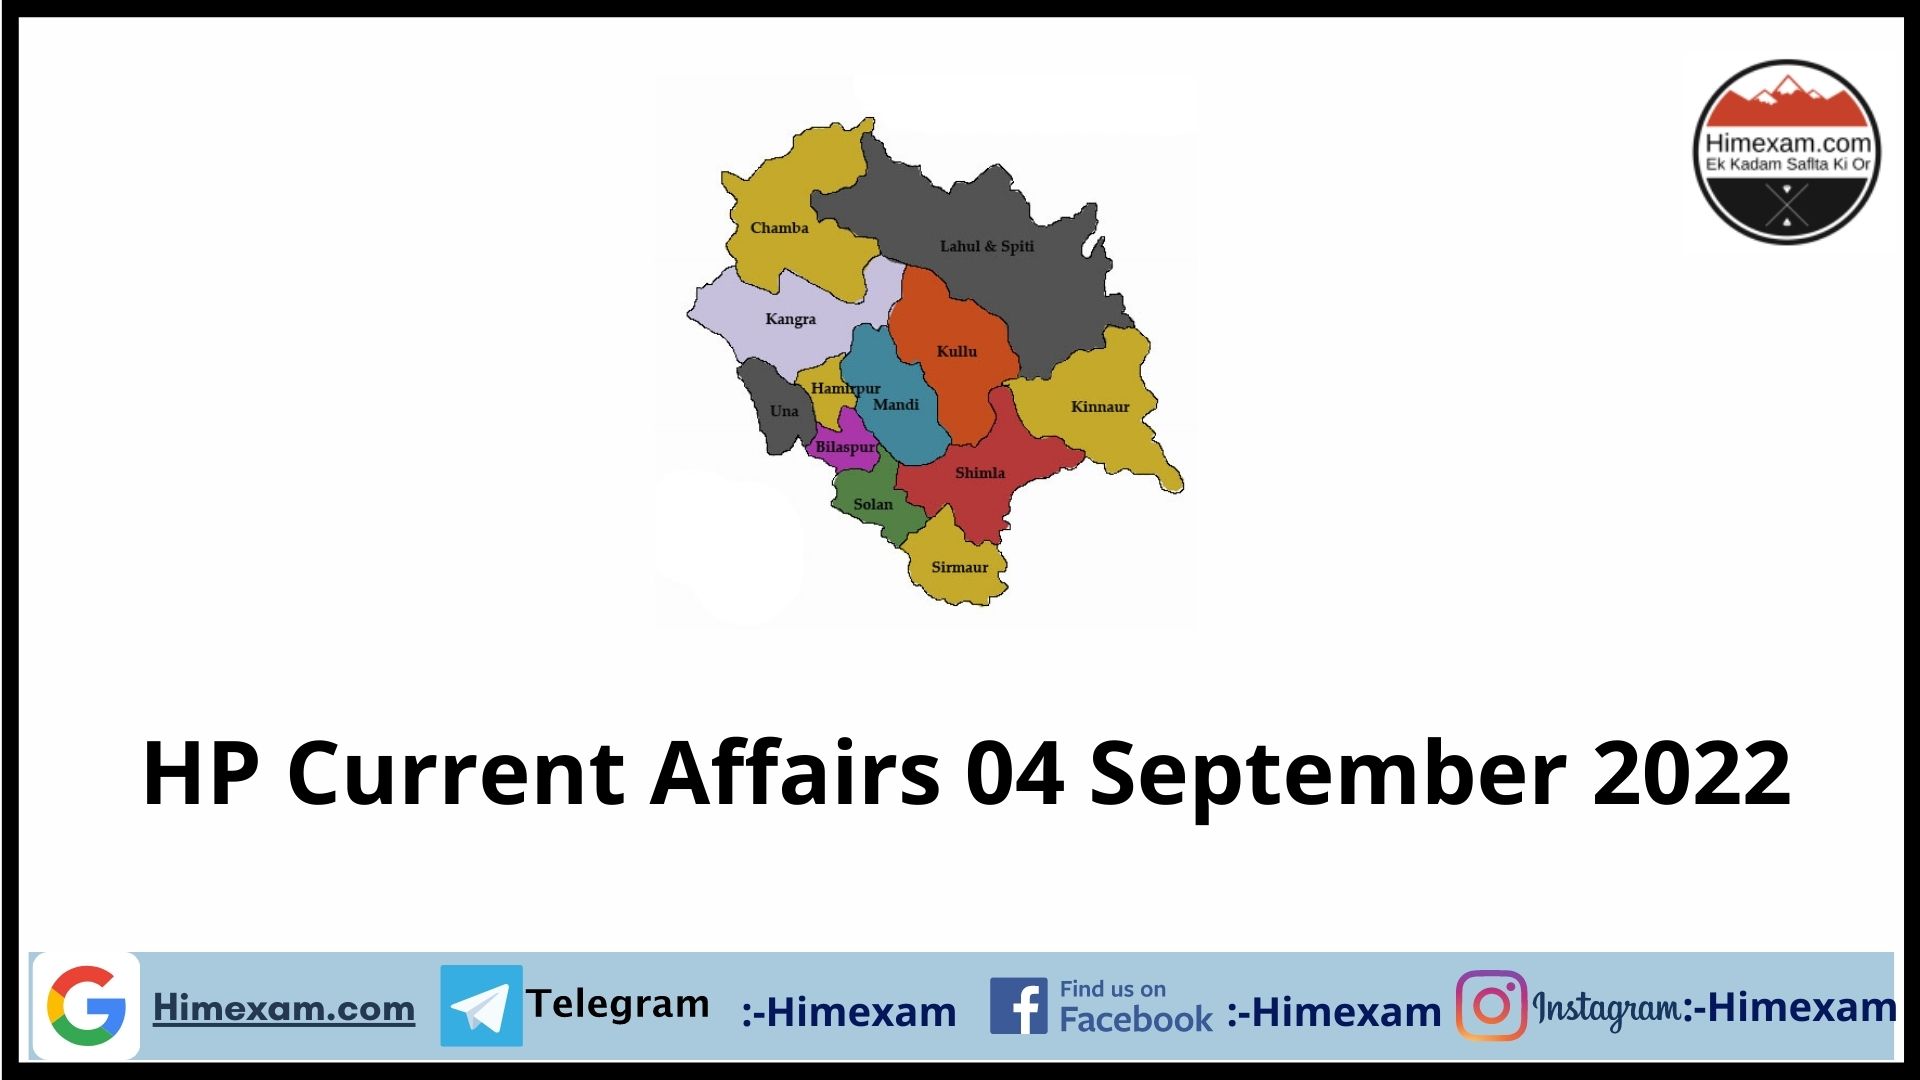 HP Current Affairs 04 September 2022